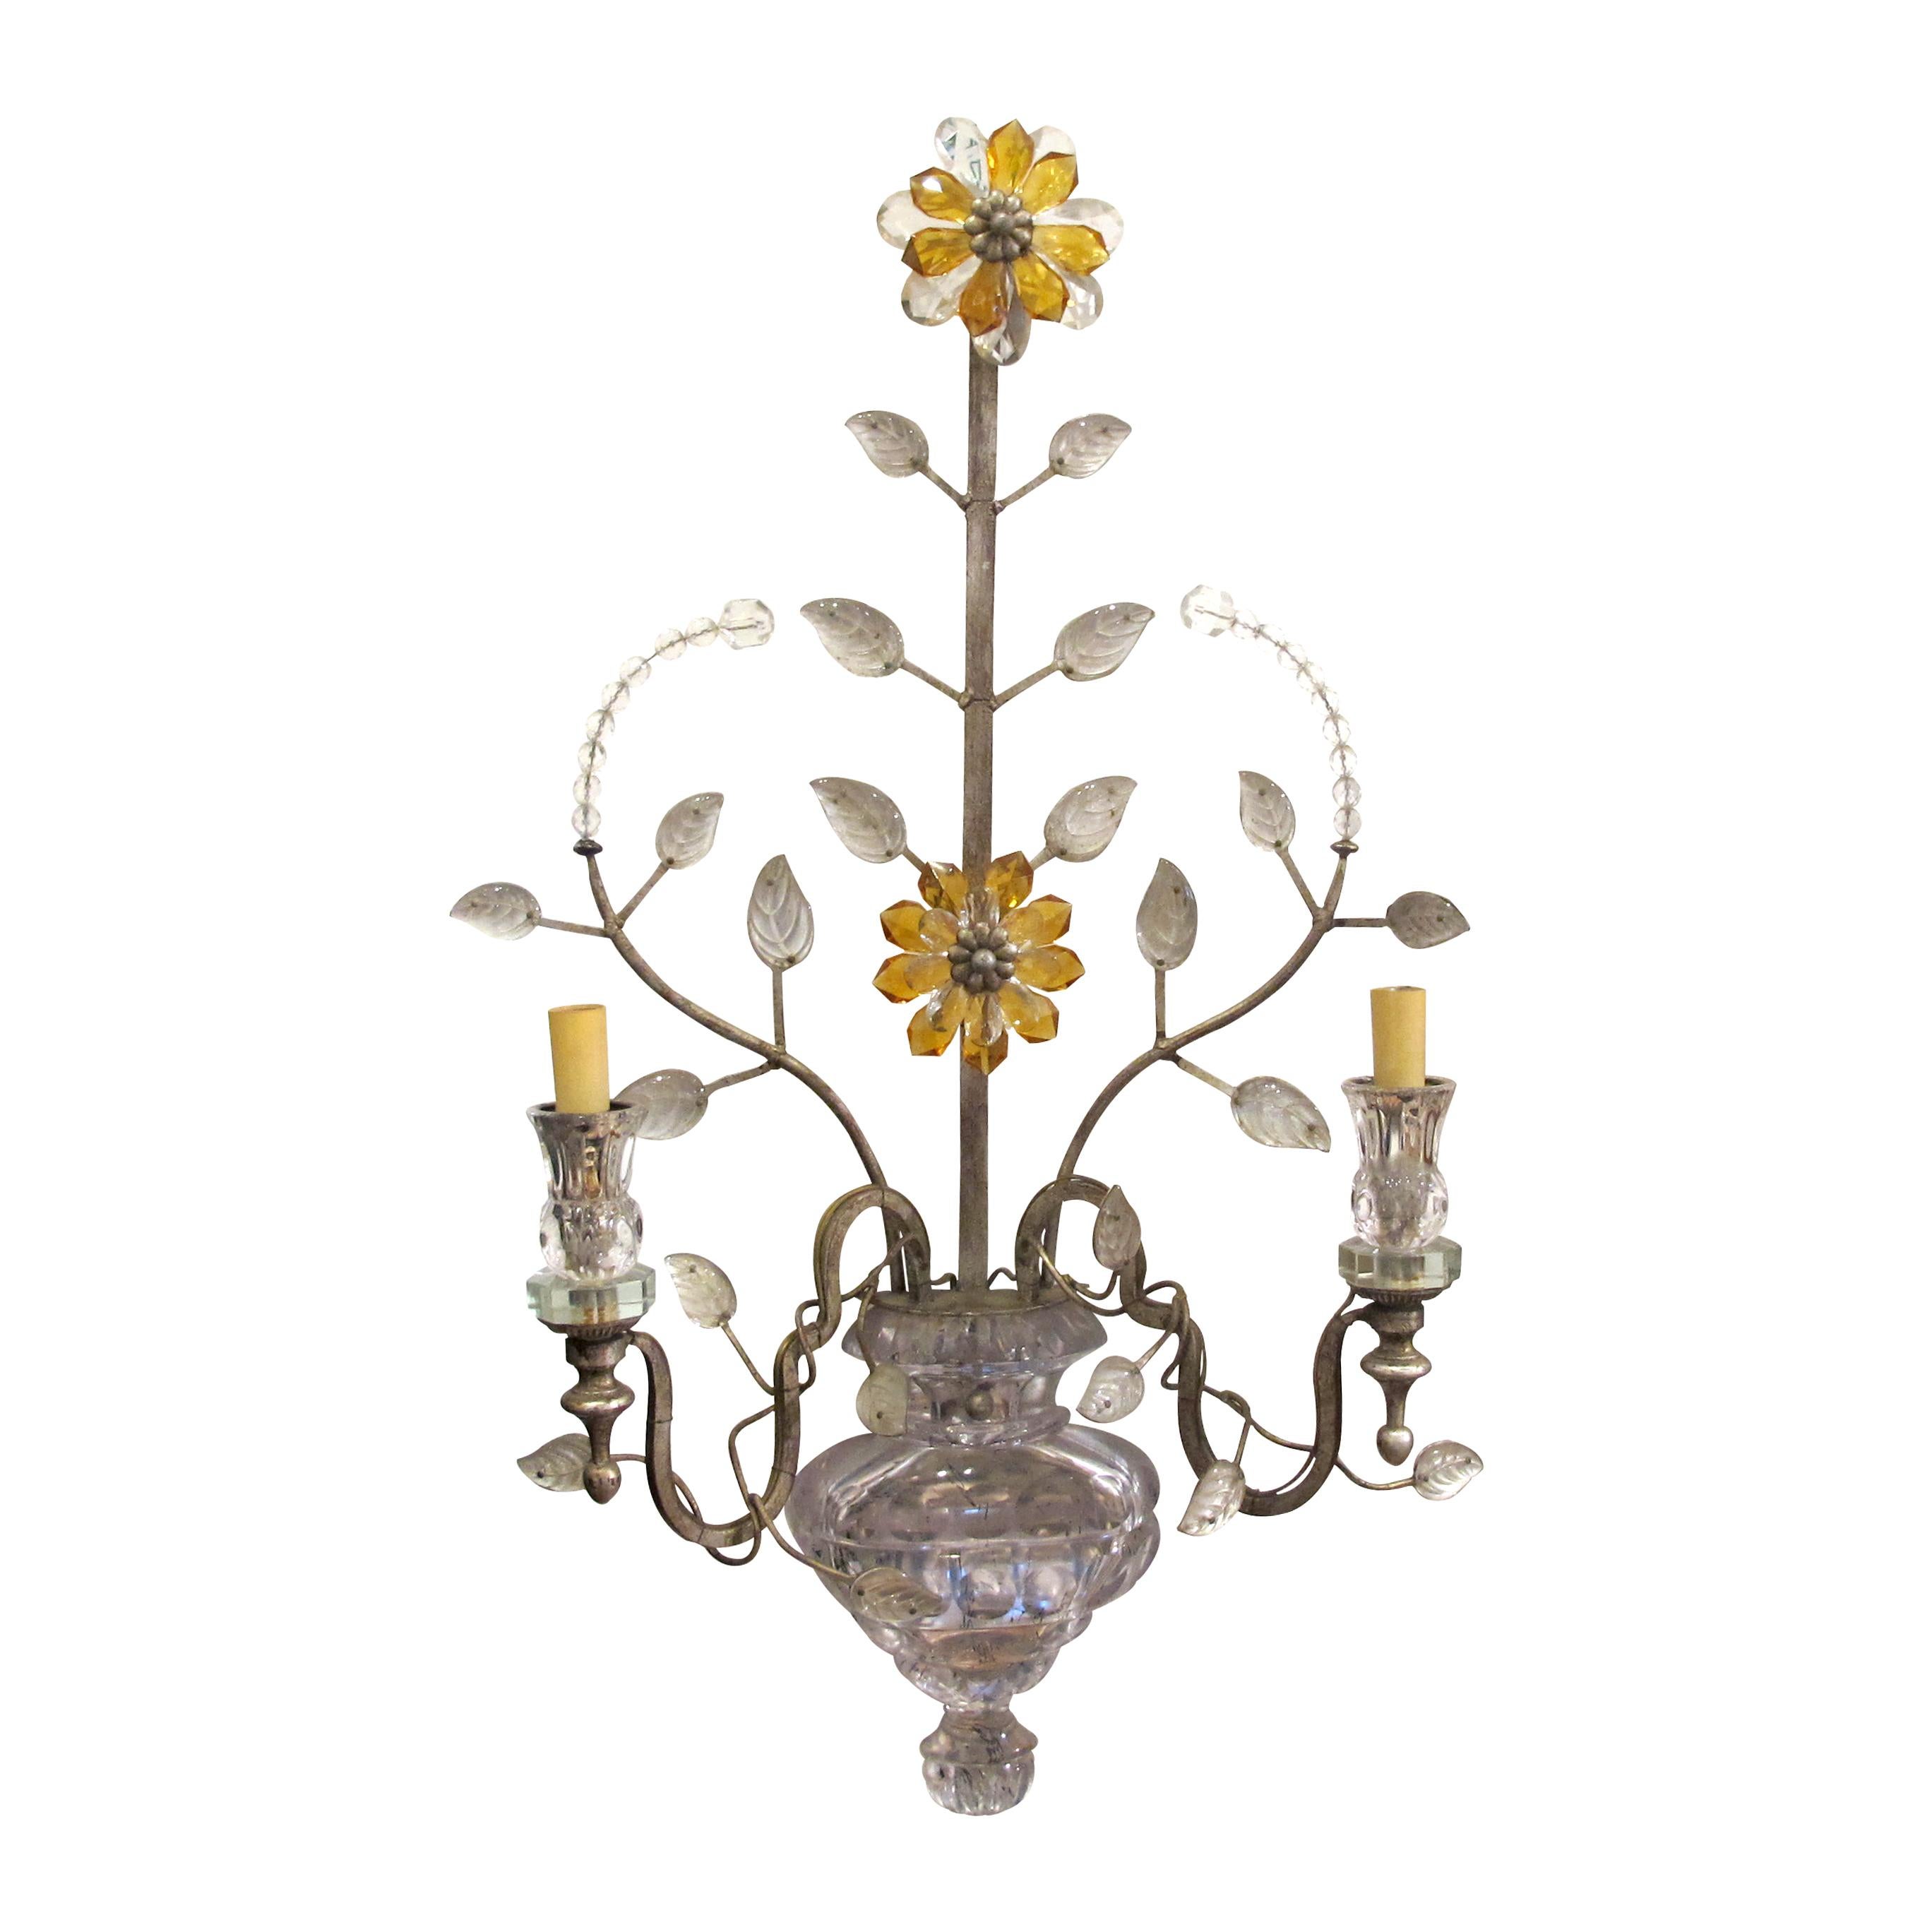 A very elegant and highly decorative pair of floral wall lights with two arms made by Banci of Firenze in the 1970s. The flowers are made of clear and amber crystals mounted on a silver-gilt frame in the shape of branches. 

Size: H67 cm x W40 cm x